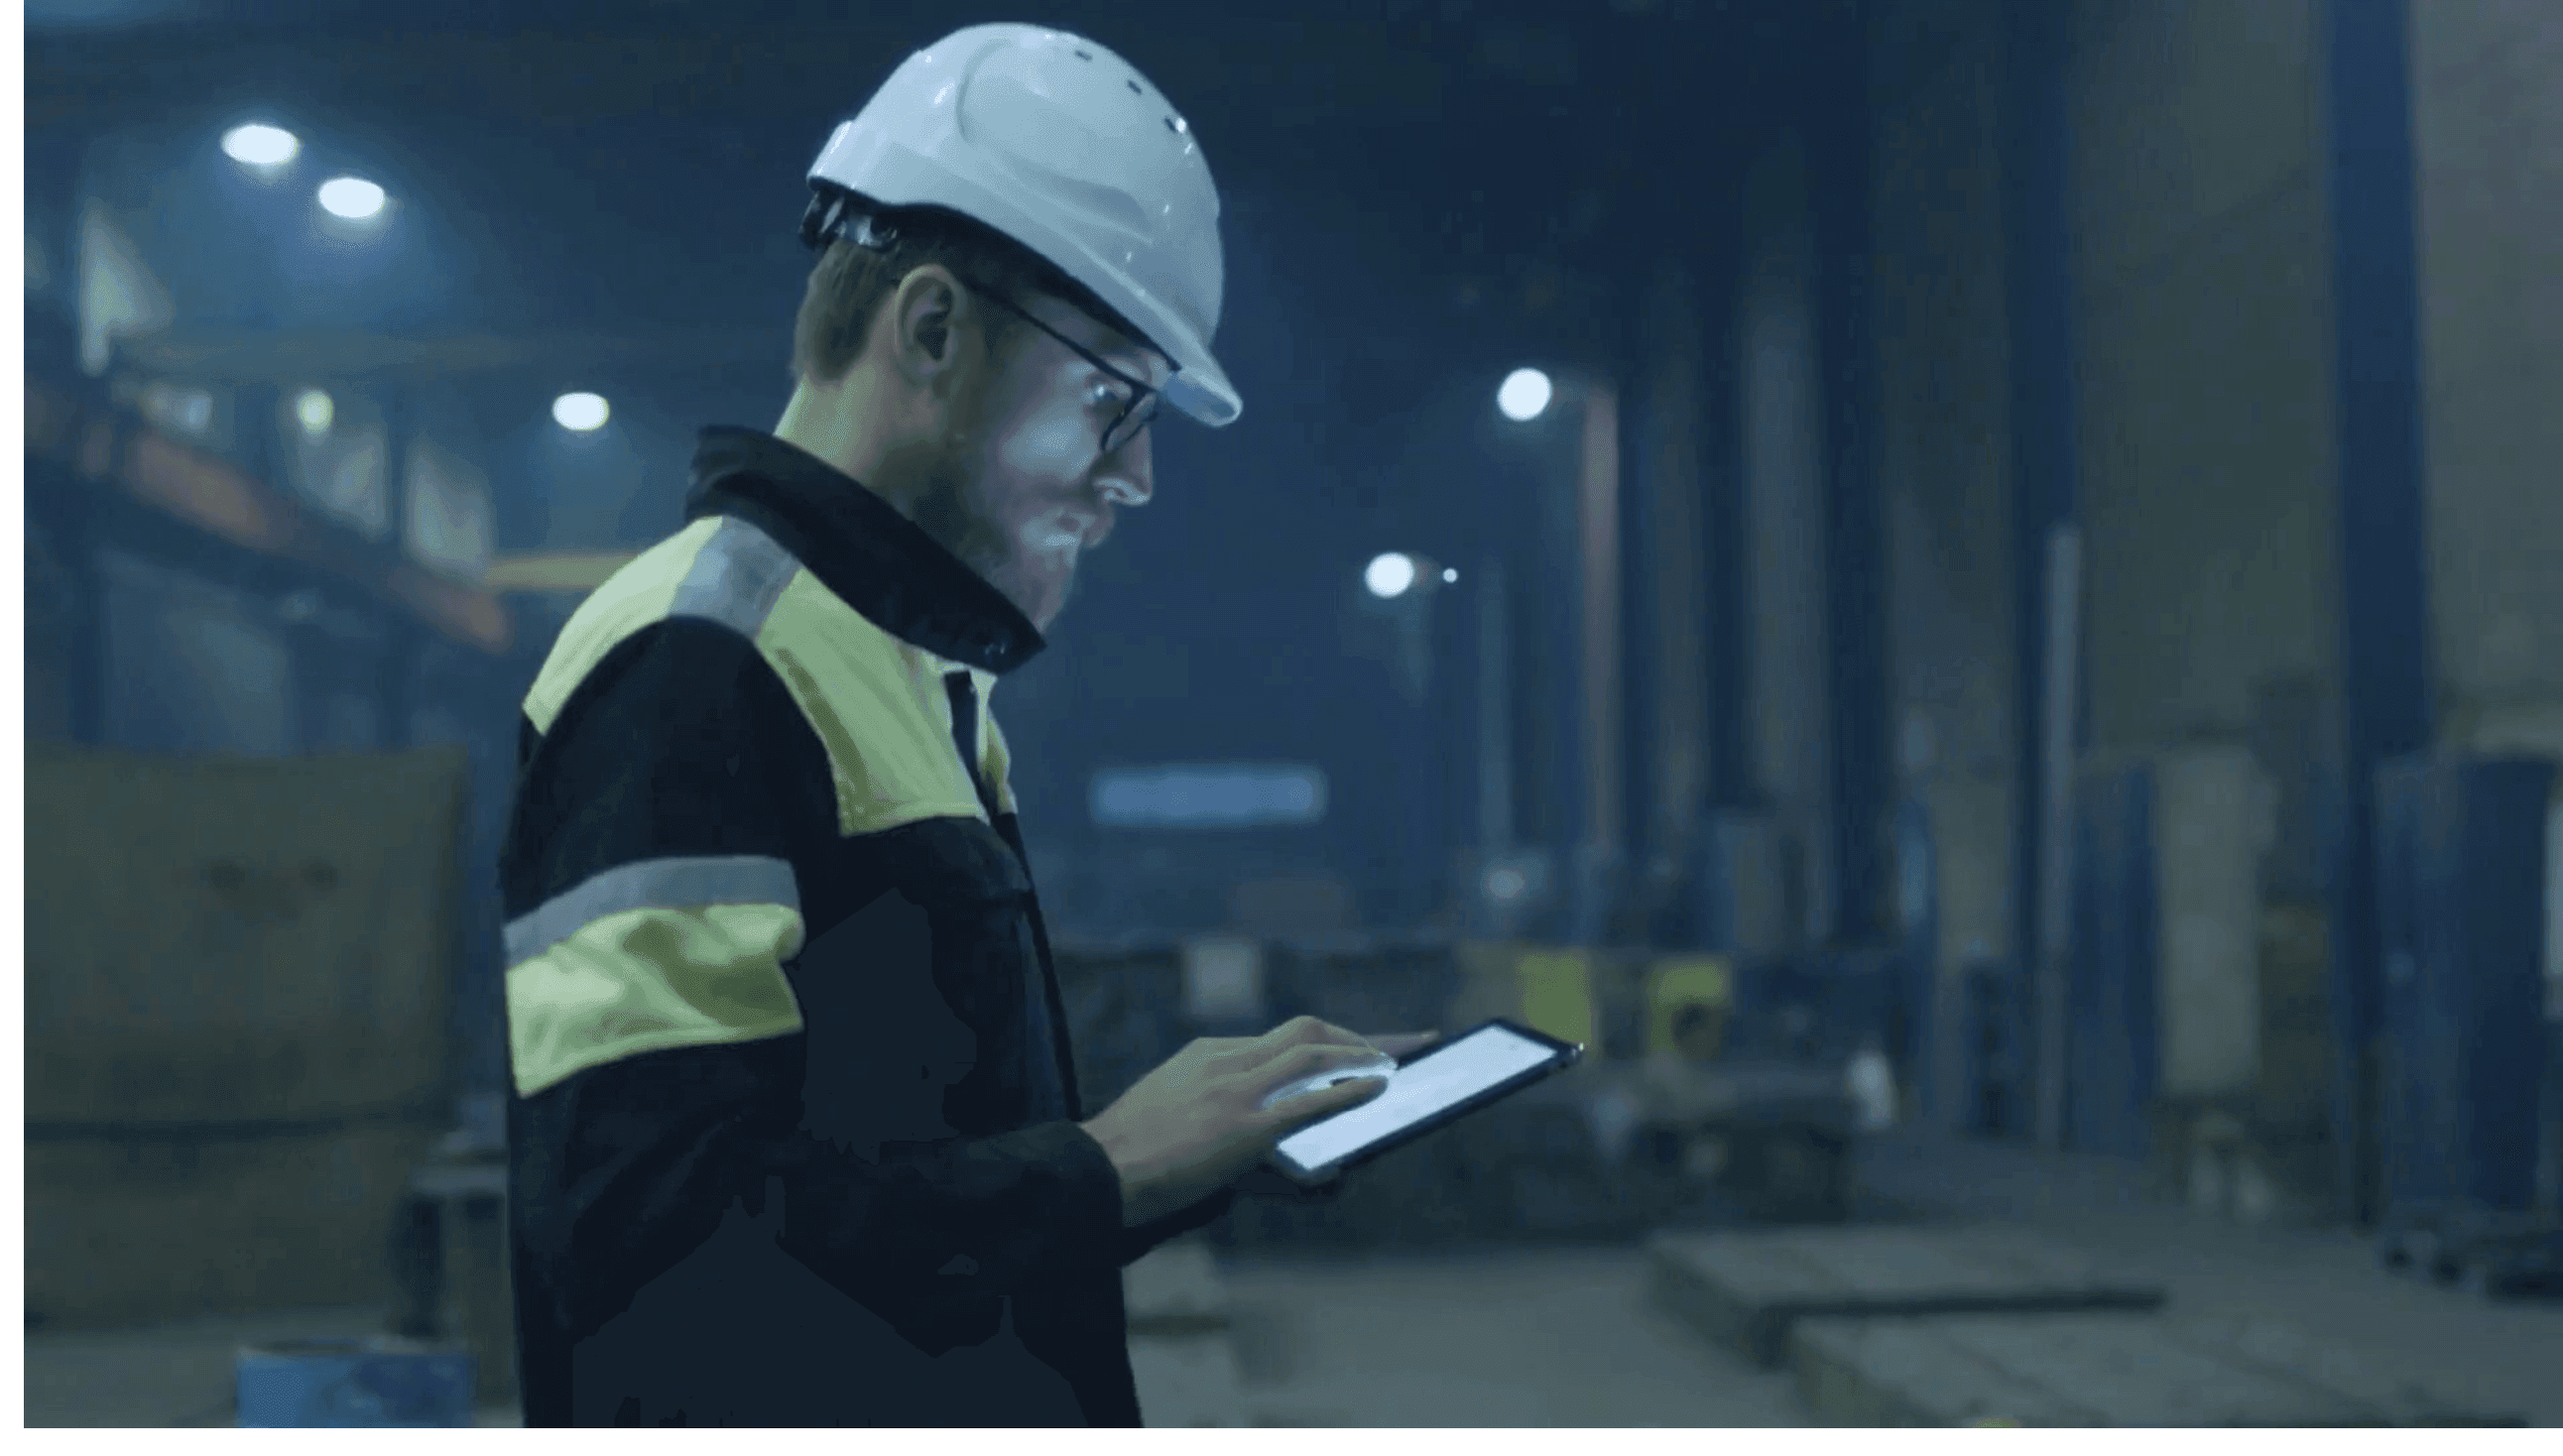 Man in hard hat walking through warehouse looking at a tablet